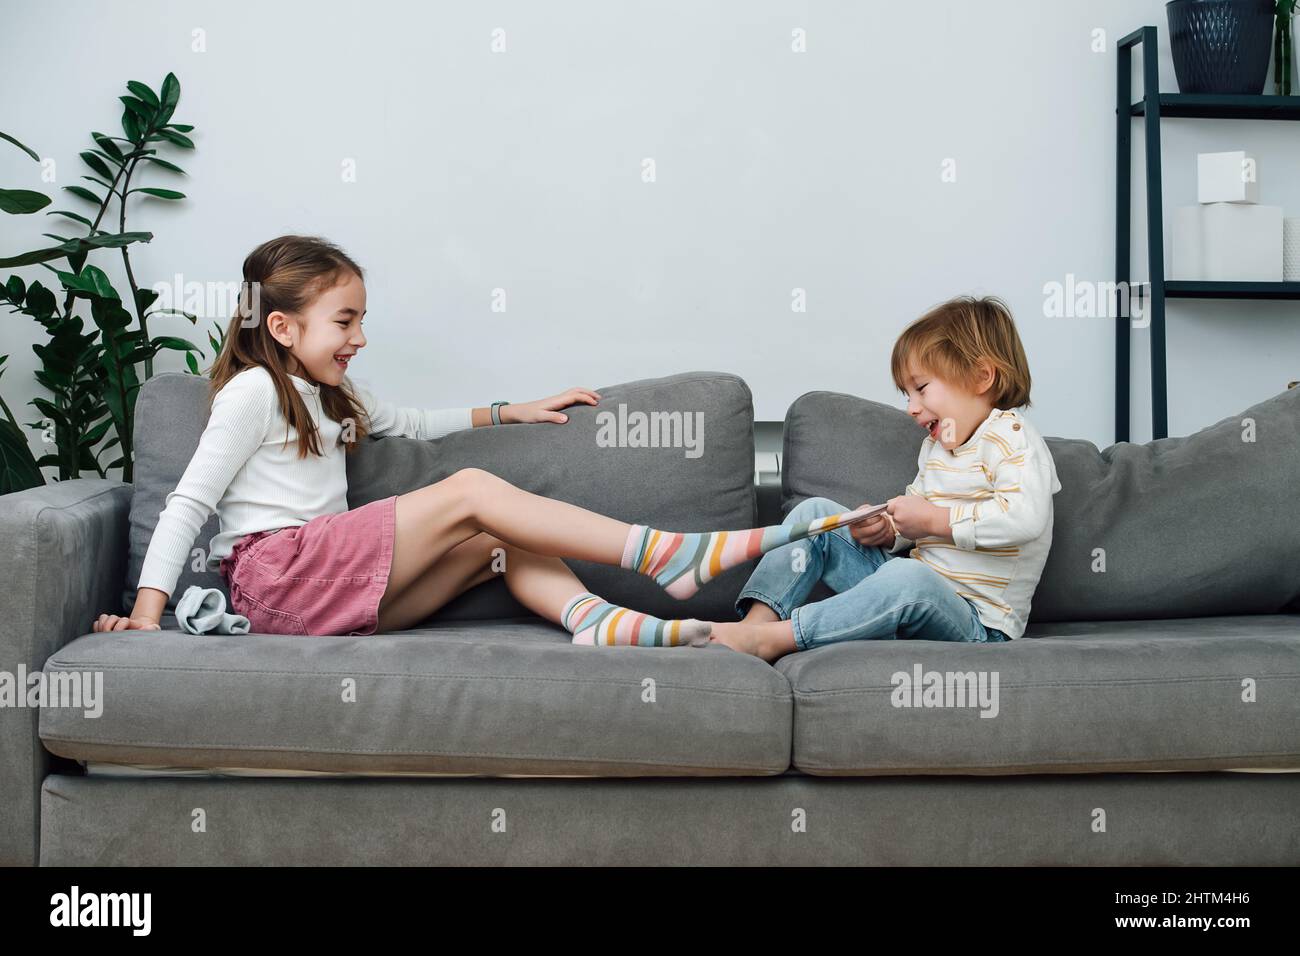 Boy pulling off sock of a girl, they are preparing for a tickling  competition. Sitting on a couch in a living room. Side view Stock Photo -  Alamy